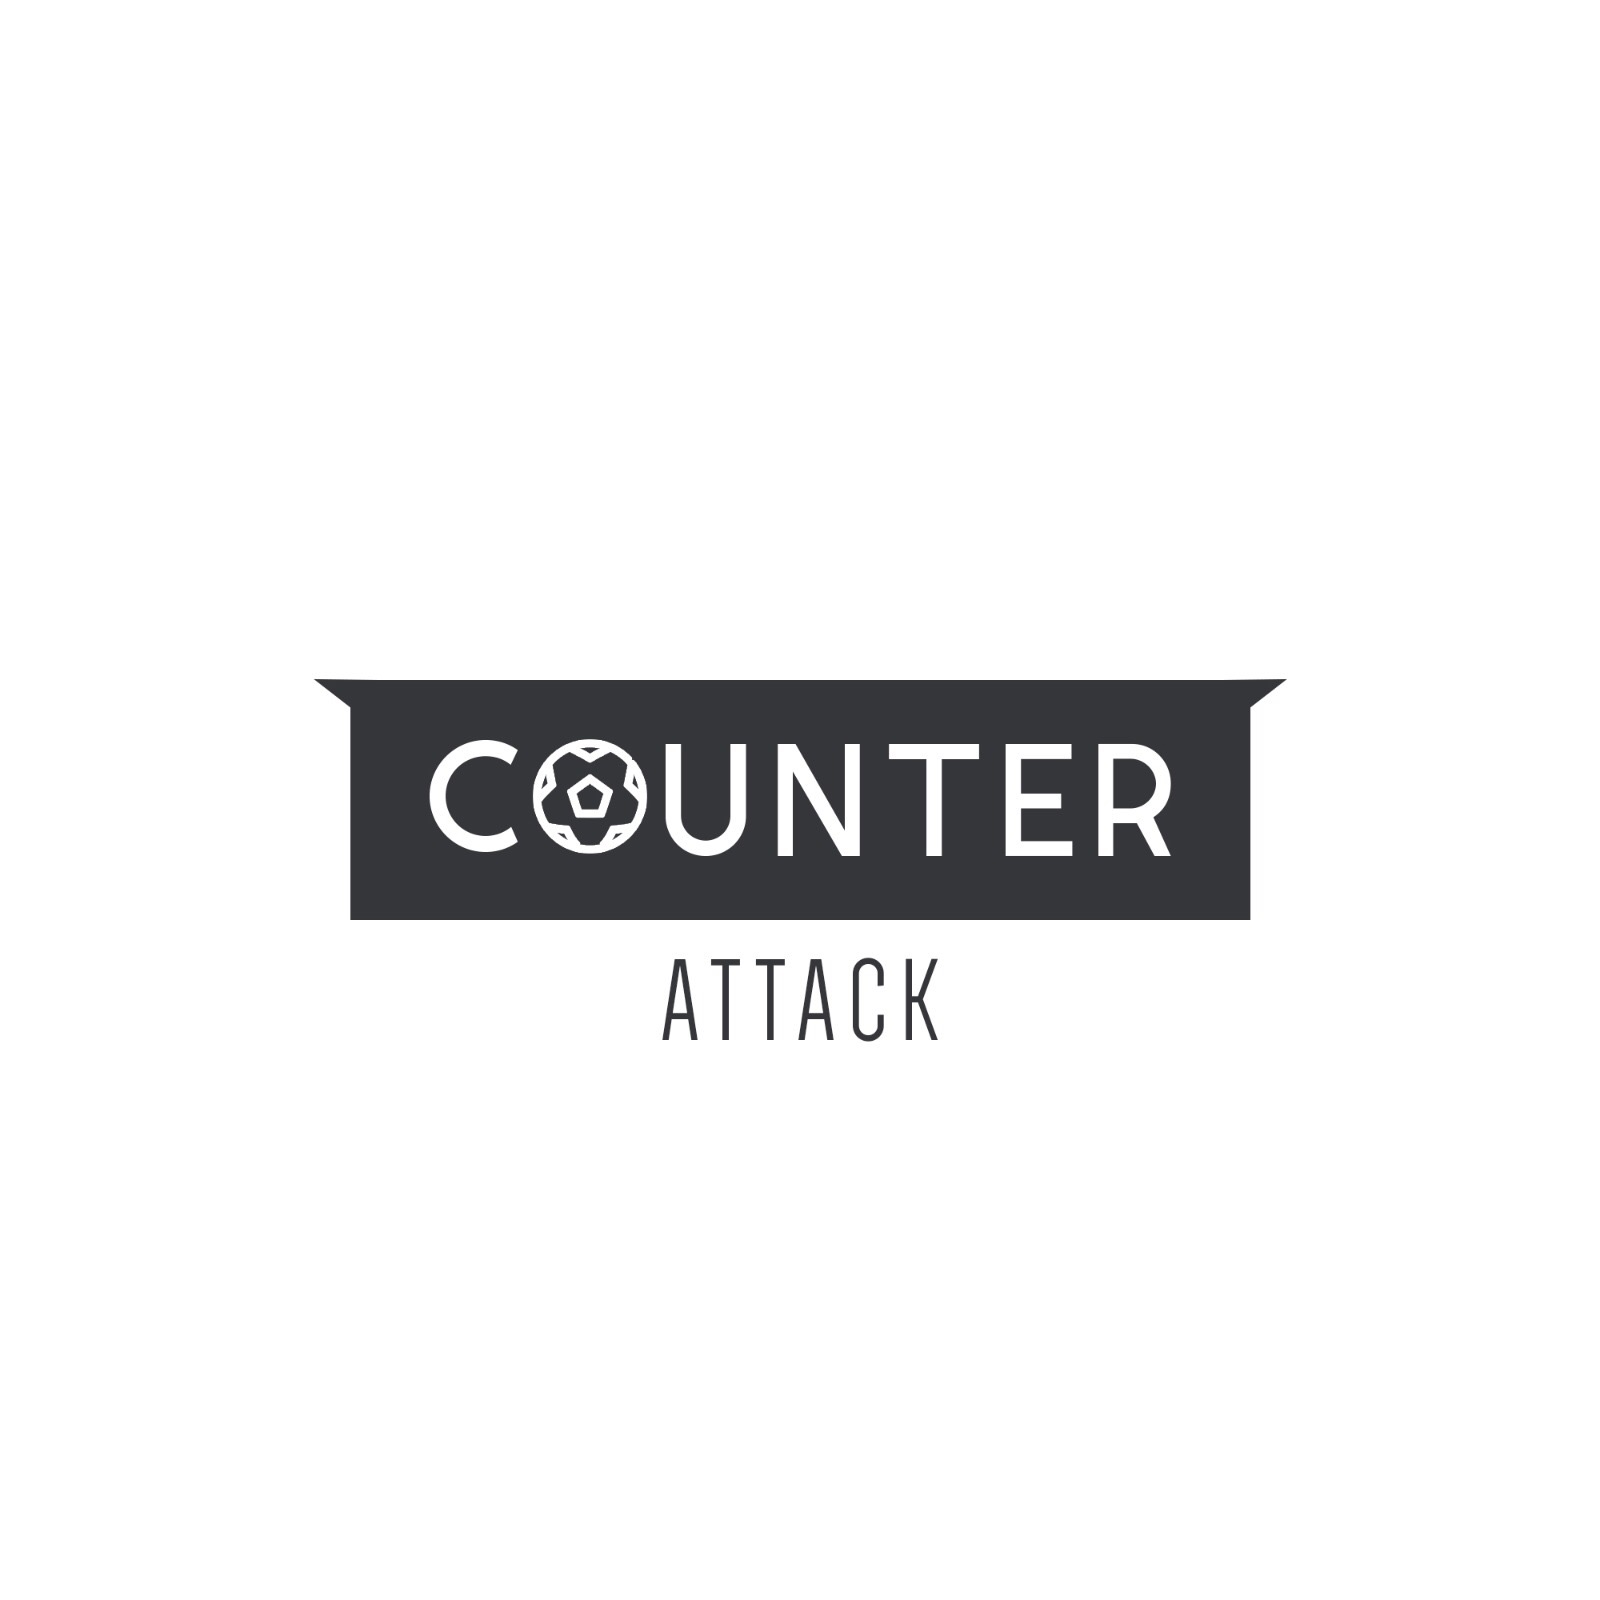 Counter Attack - Episode 42 - Poch Levy'ing Move To Madrid?